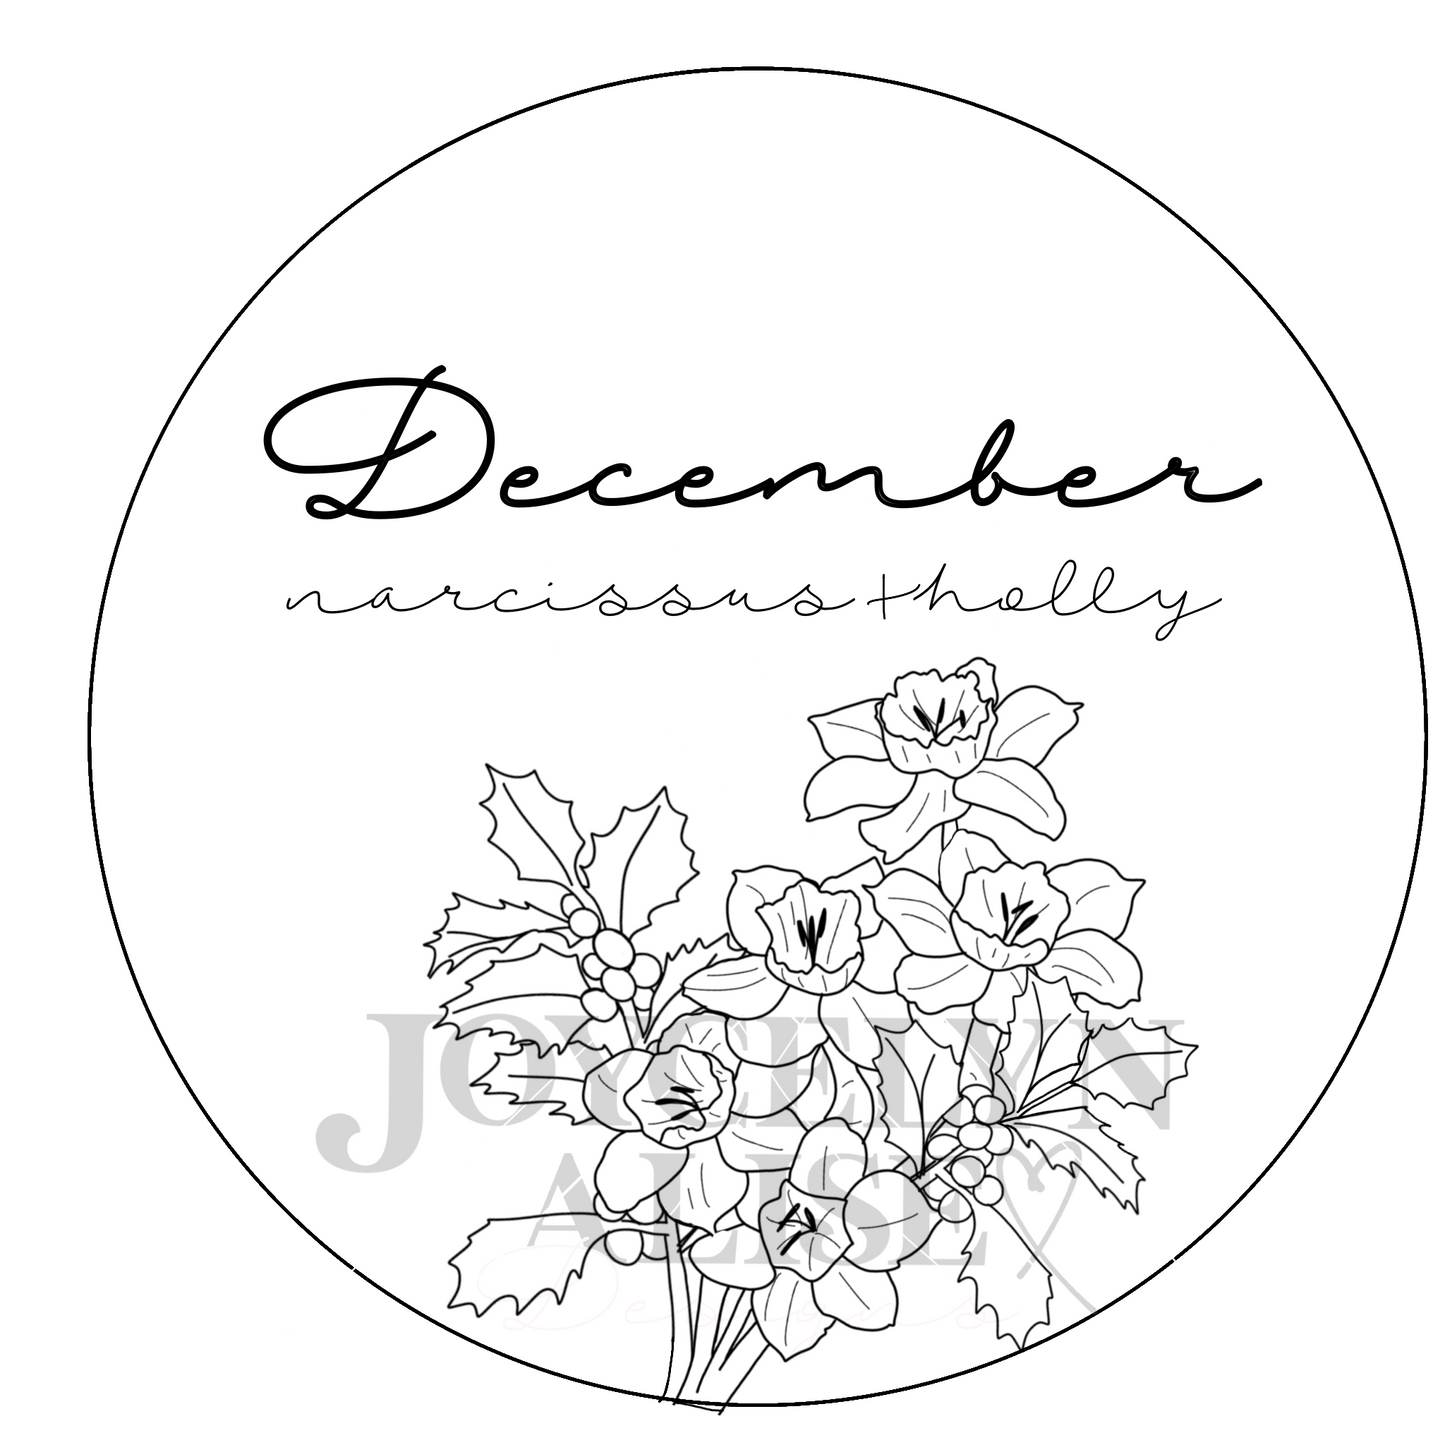 December holly + narcissus scroll saw template